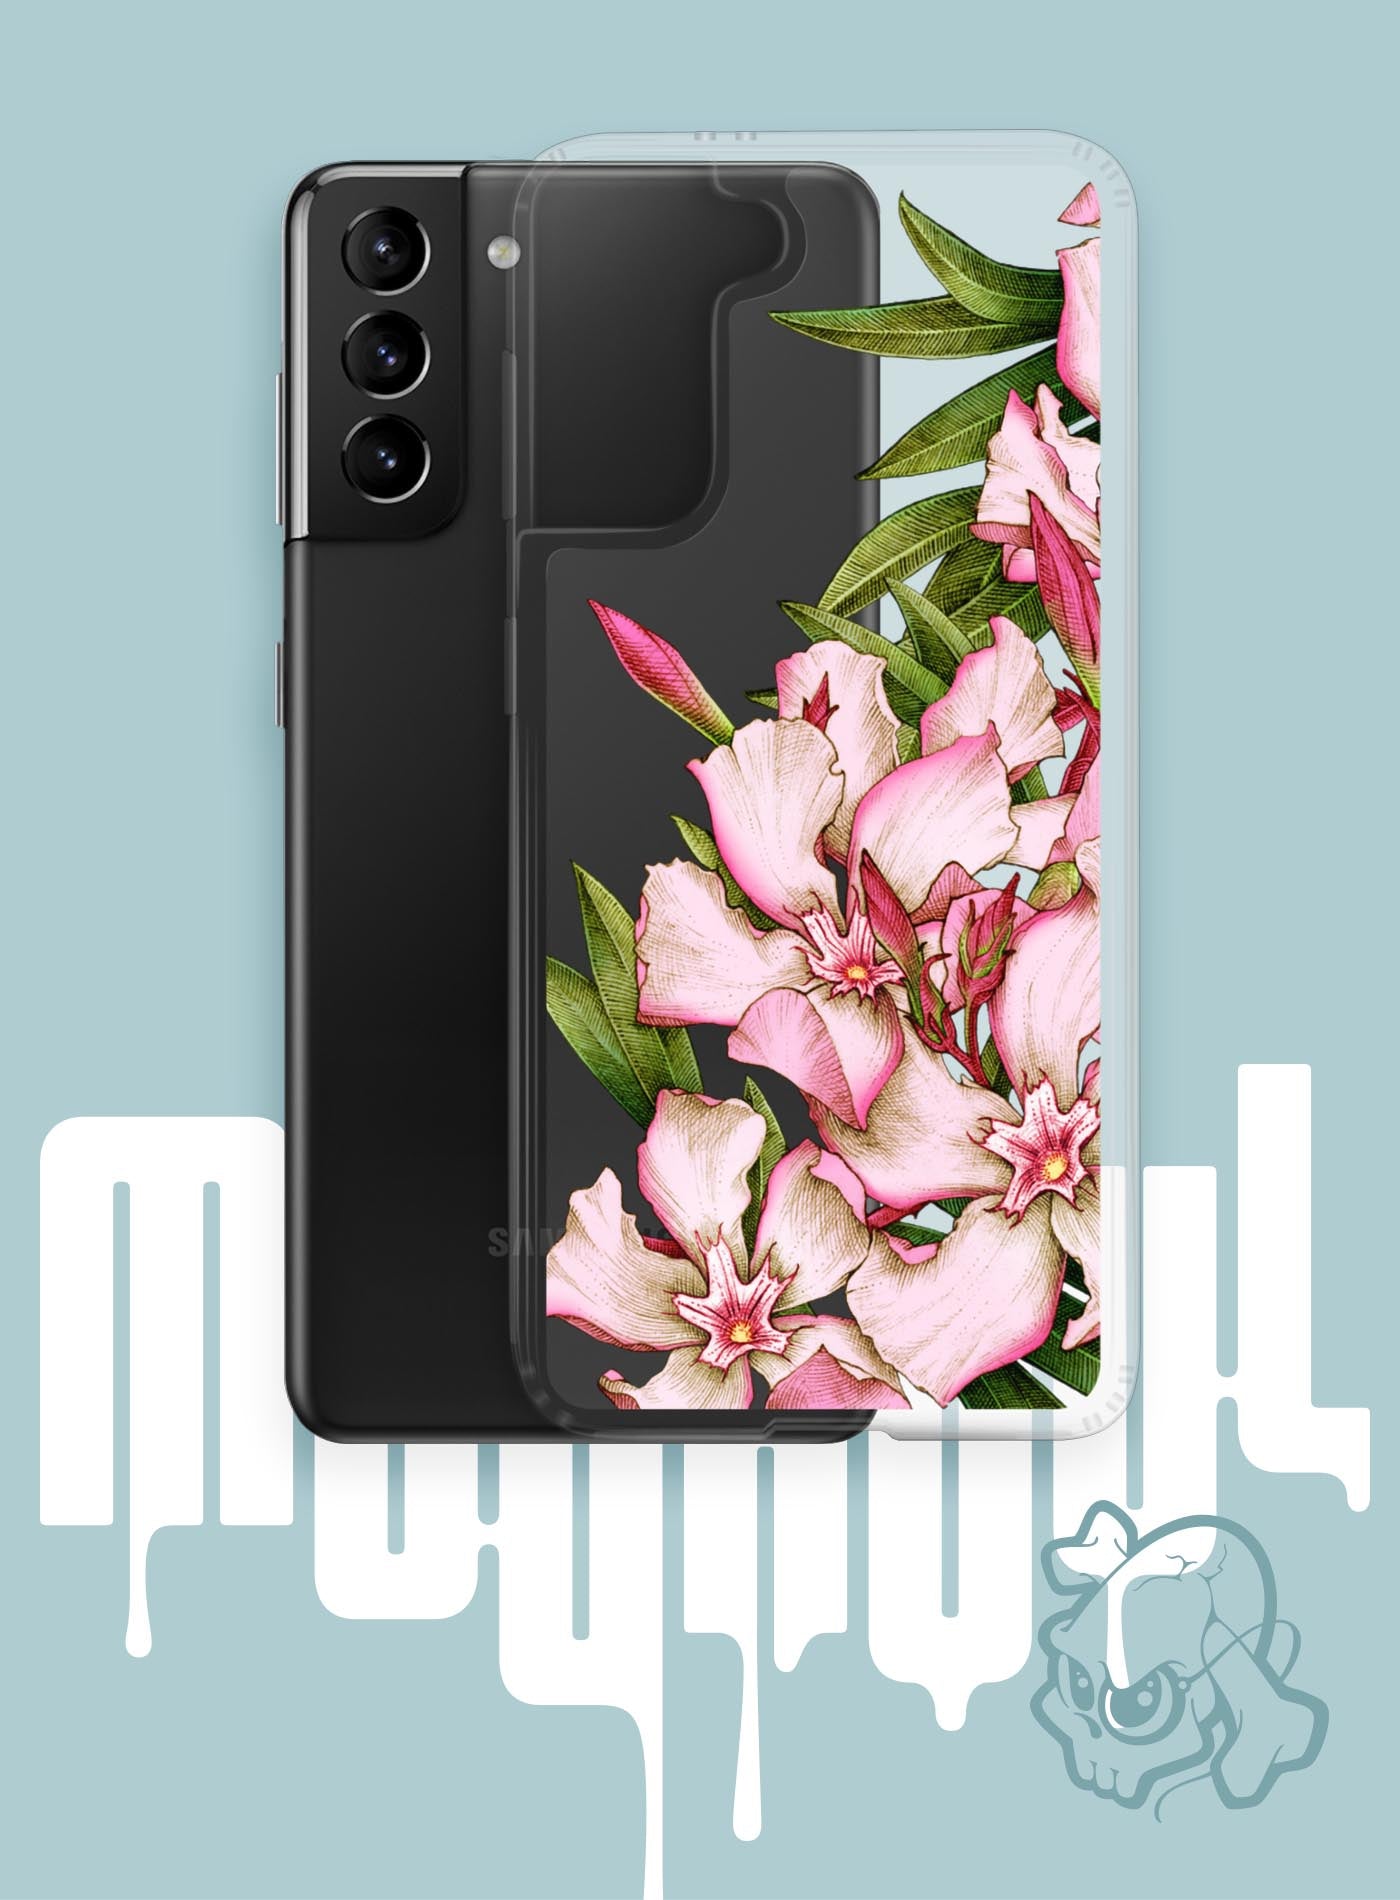 Samsung phone case featuring the poisonous flower Oleander. Illustrated by G.M. Meave